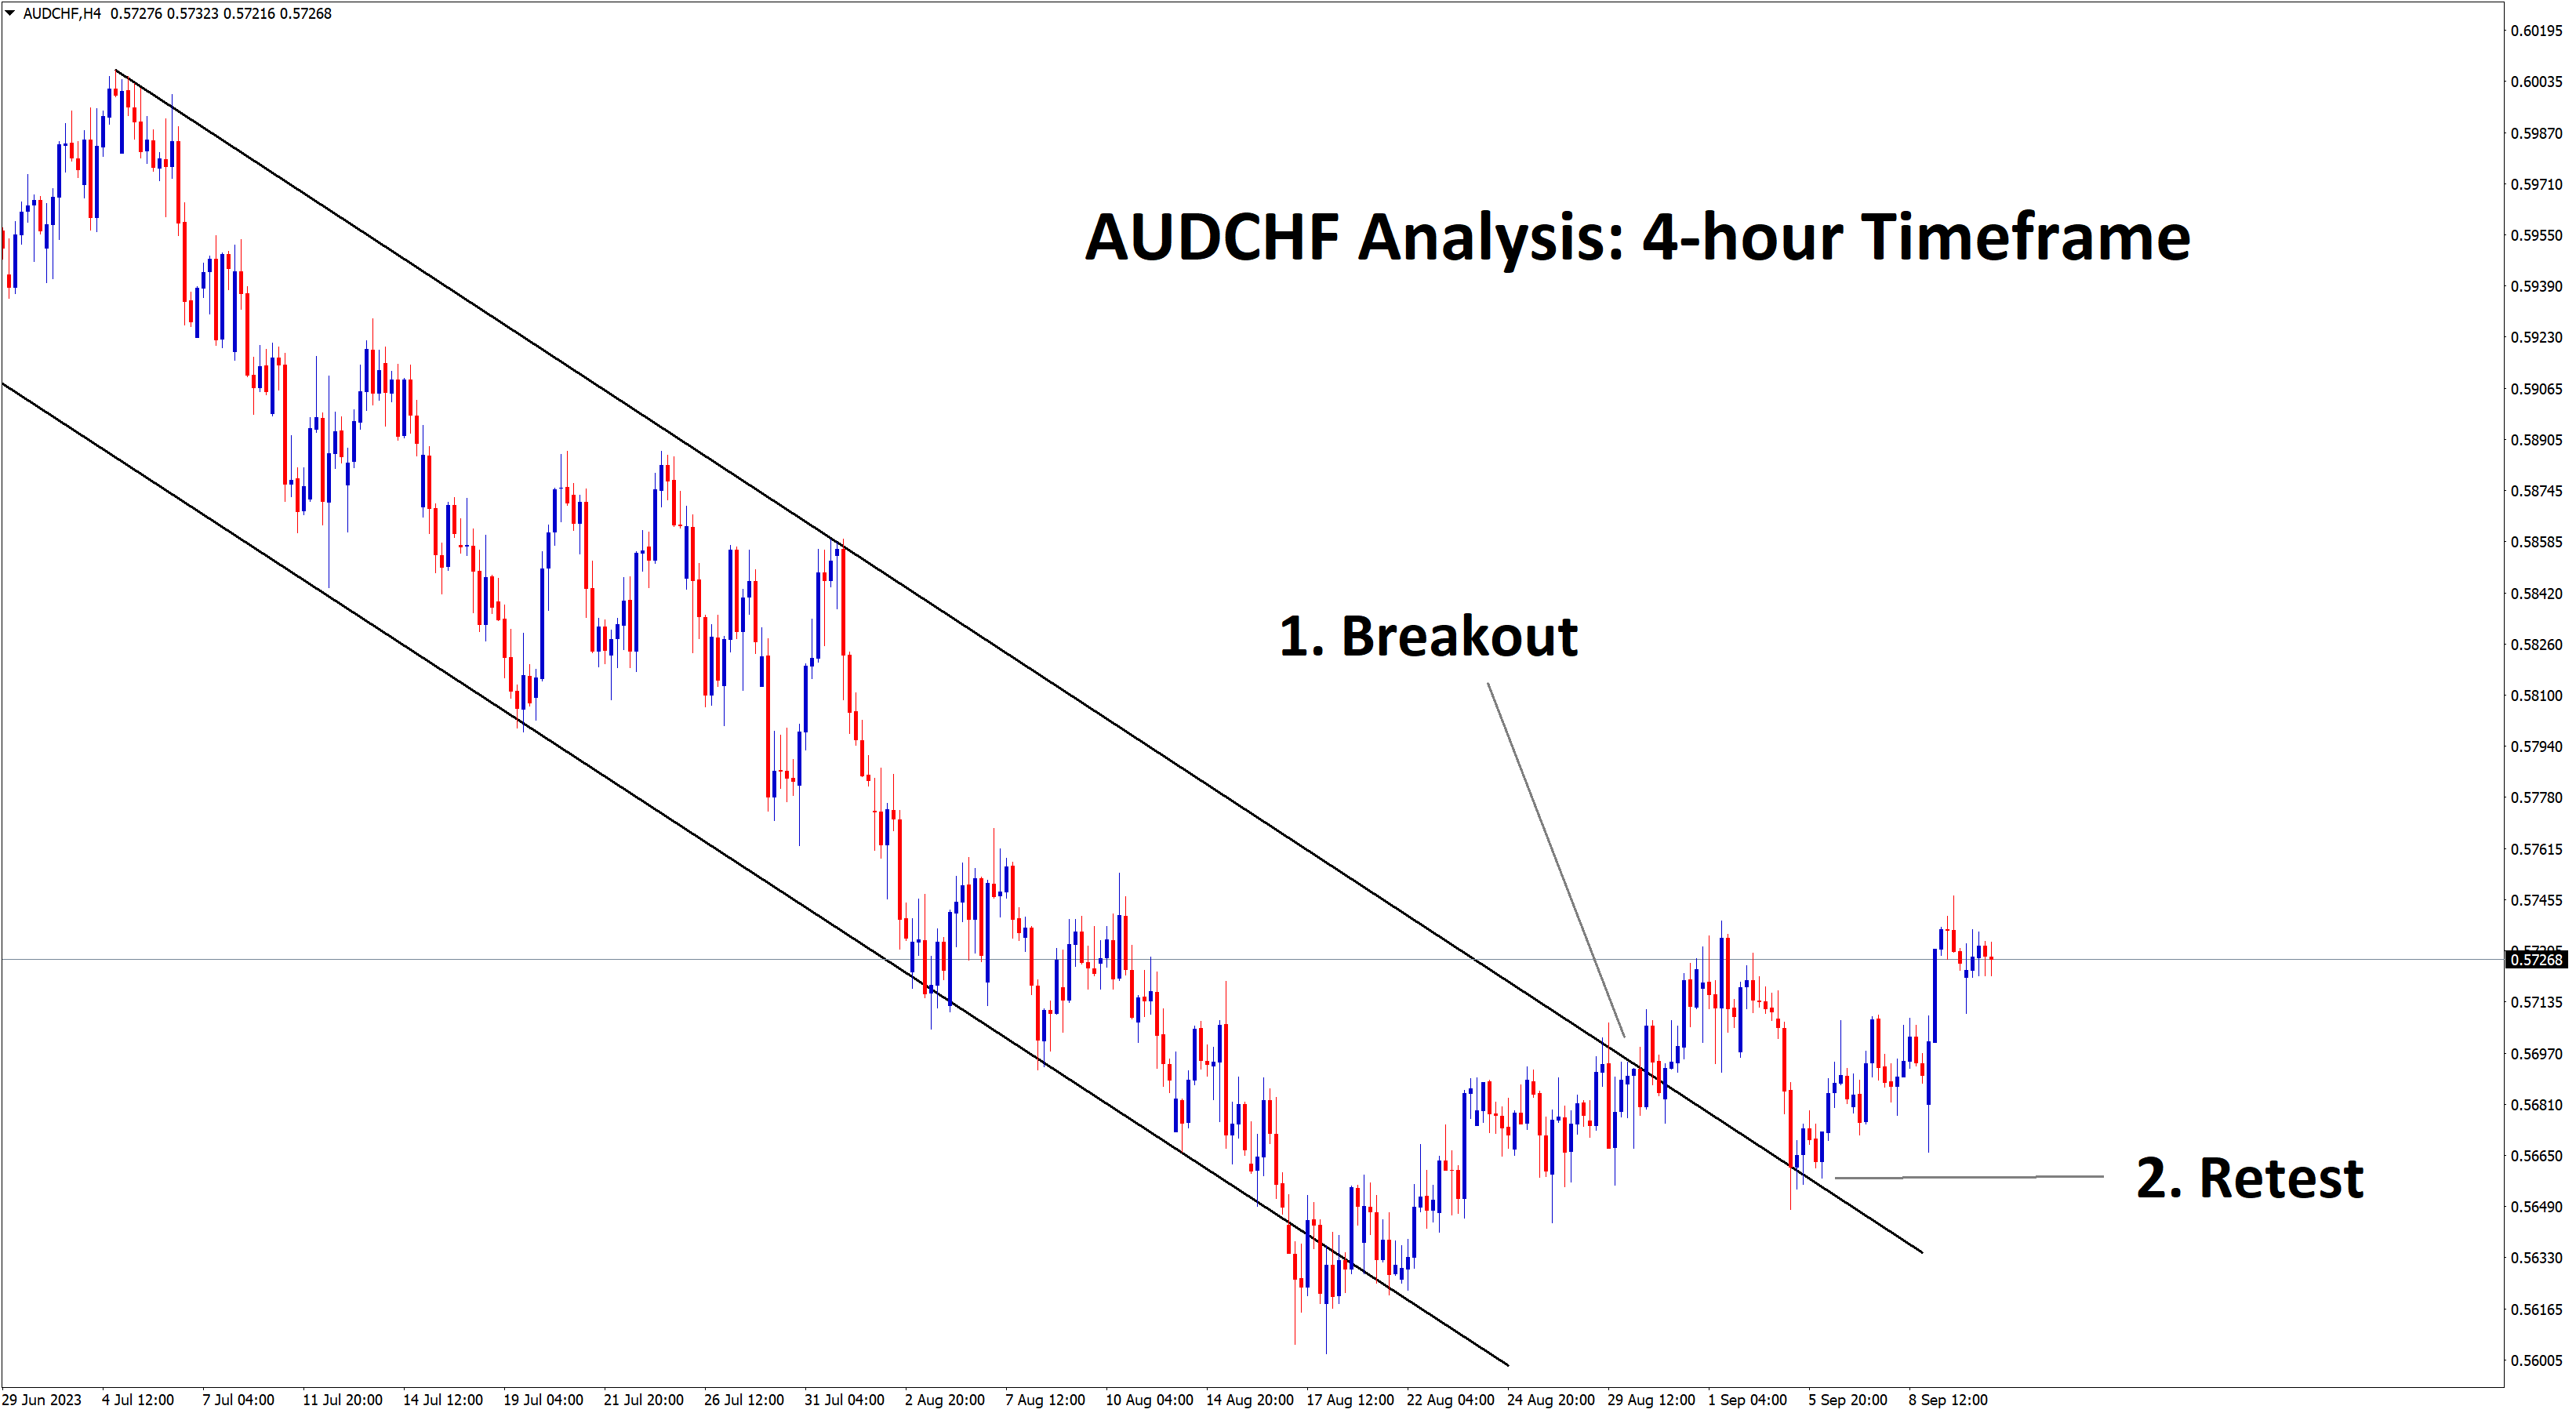 audchf is rebounding from the retest area 1